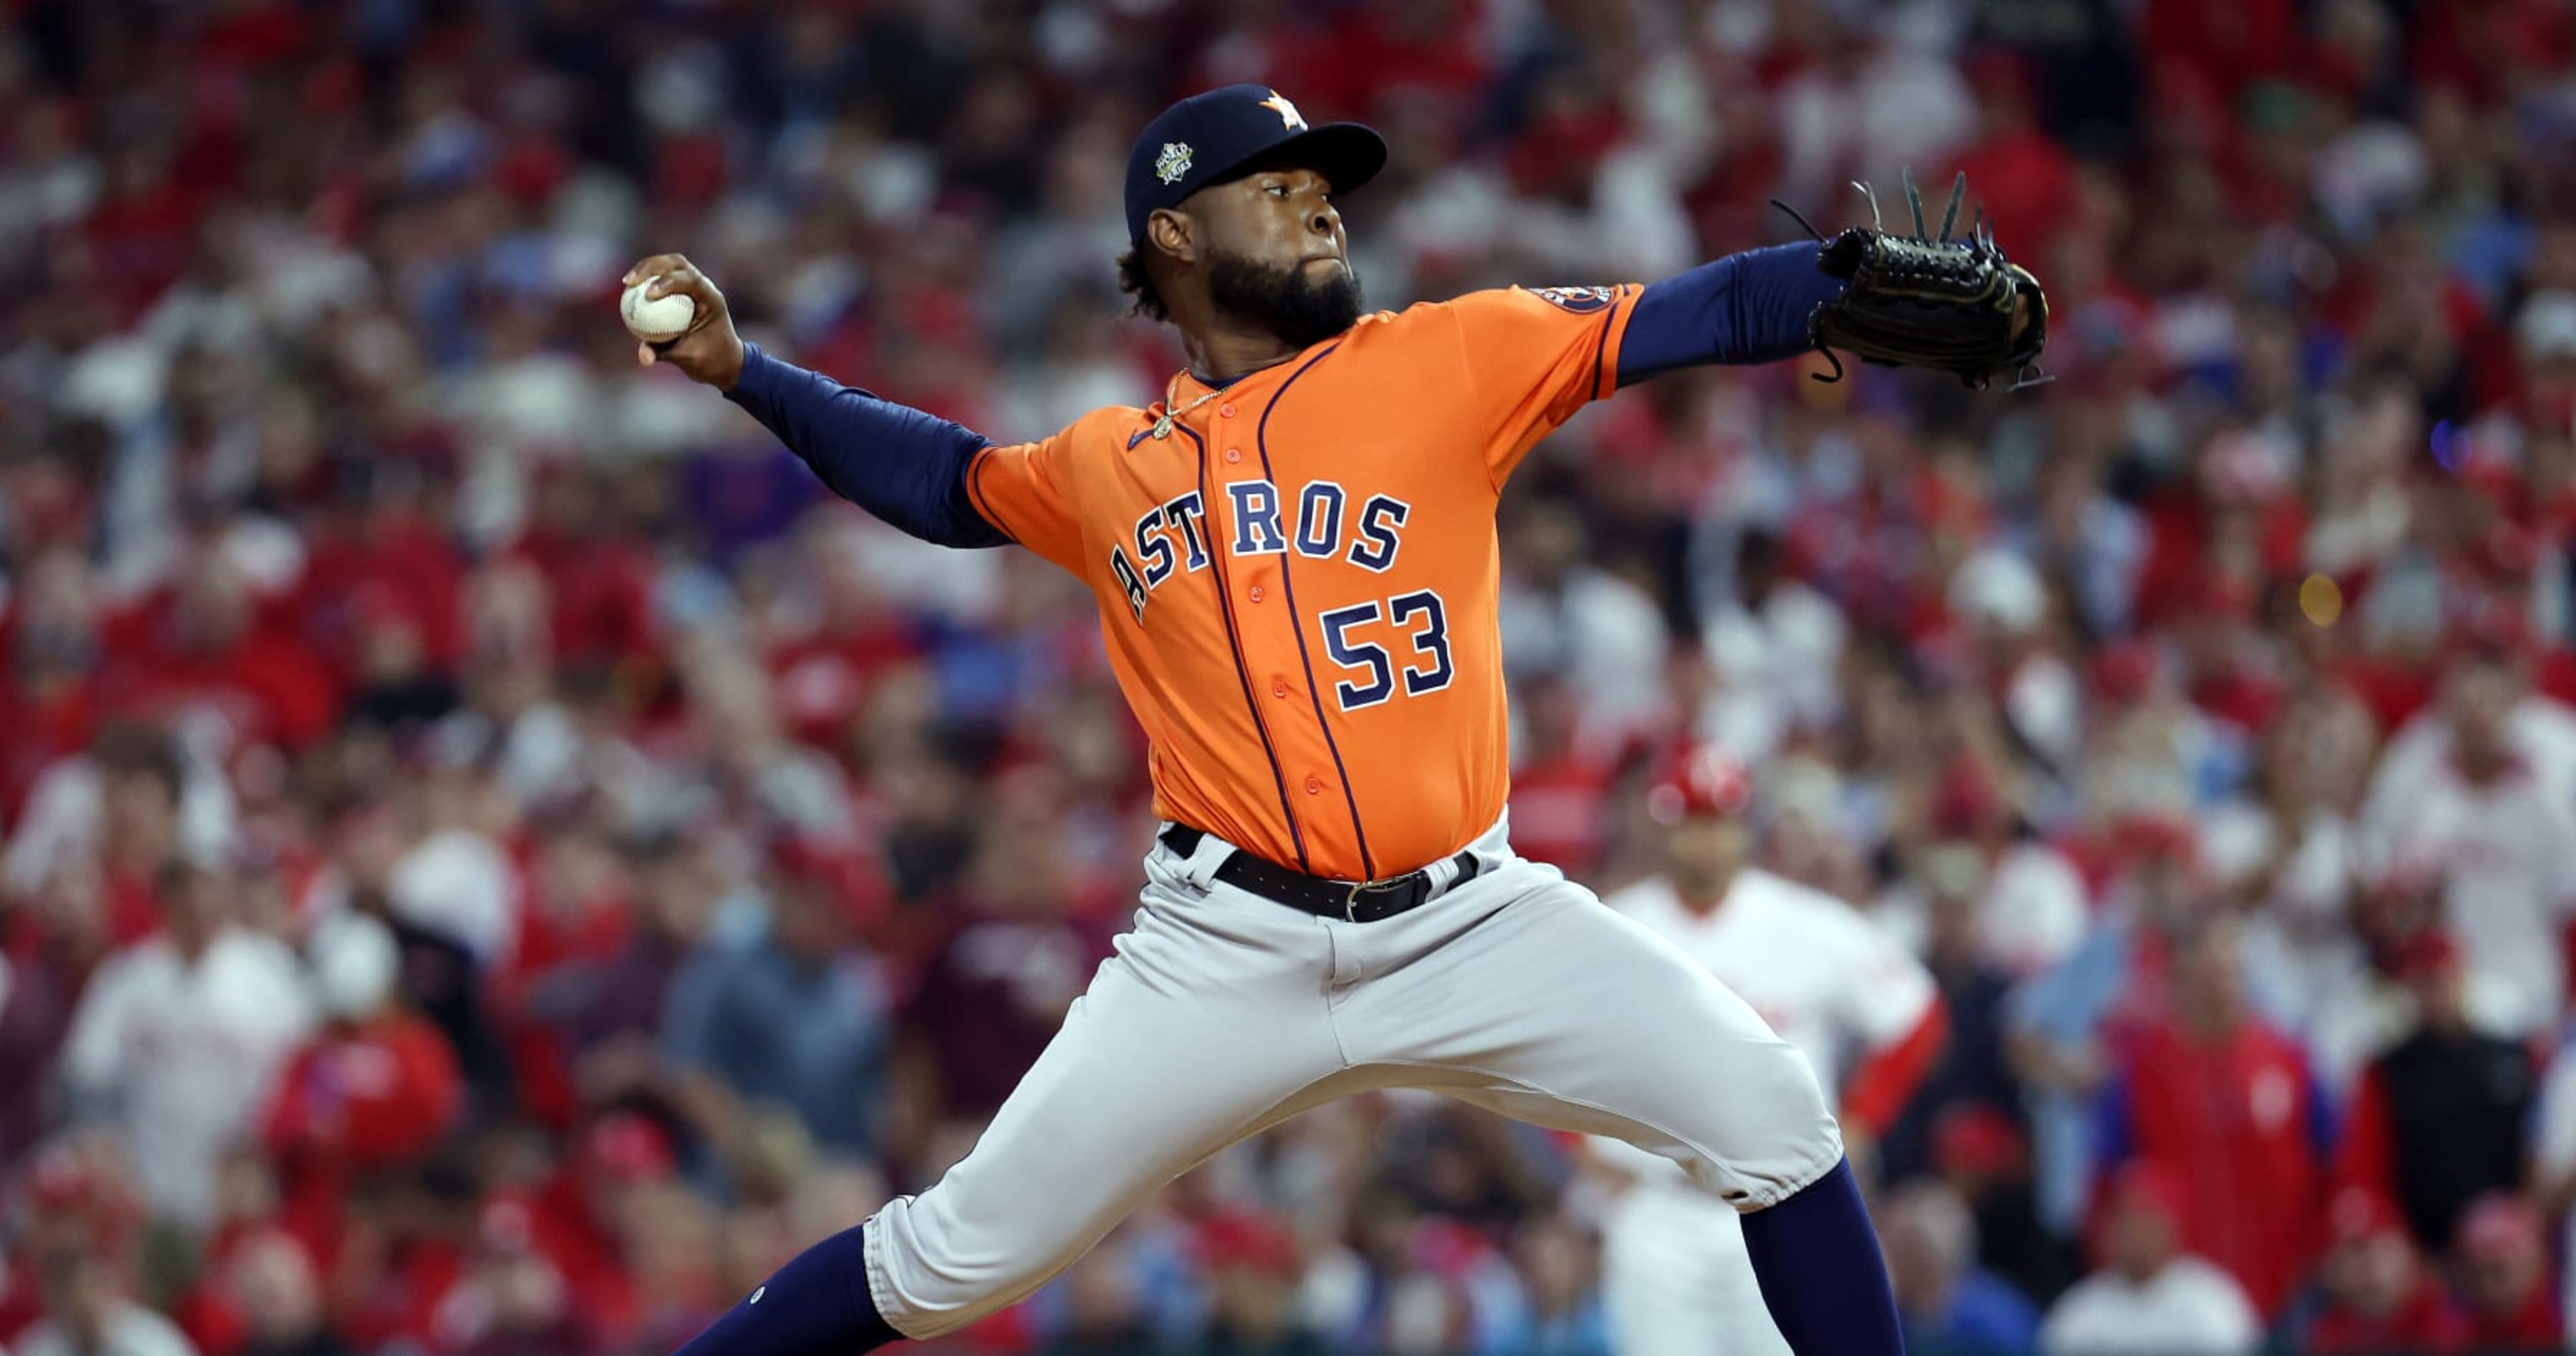 Astros to start Cristian Javier in ALCS Game 3 after Lance